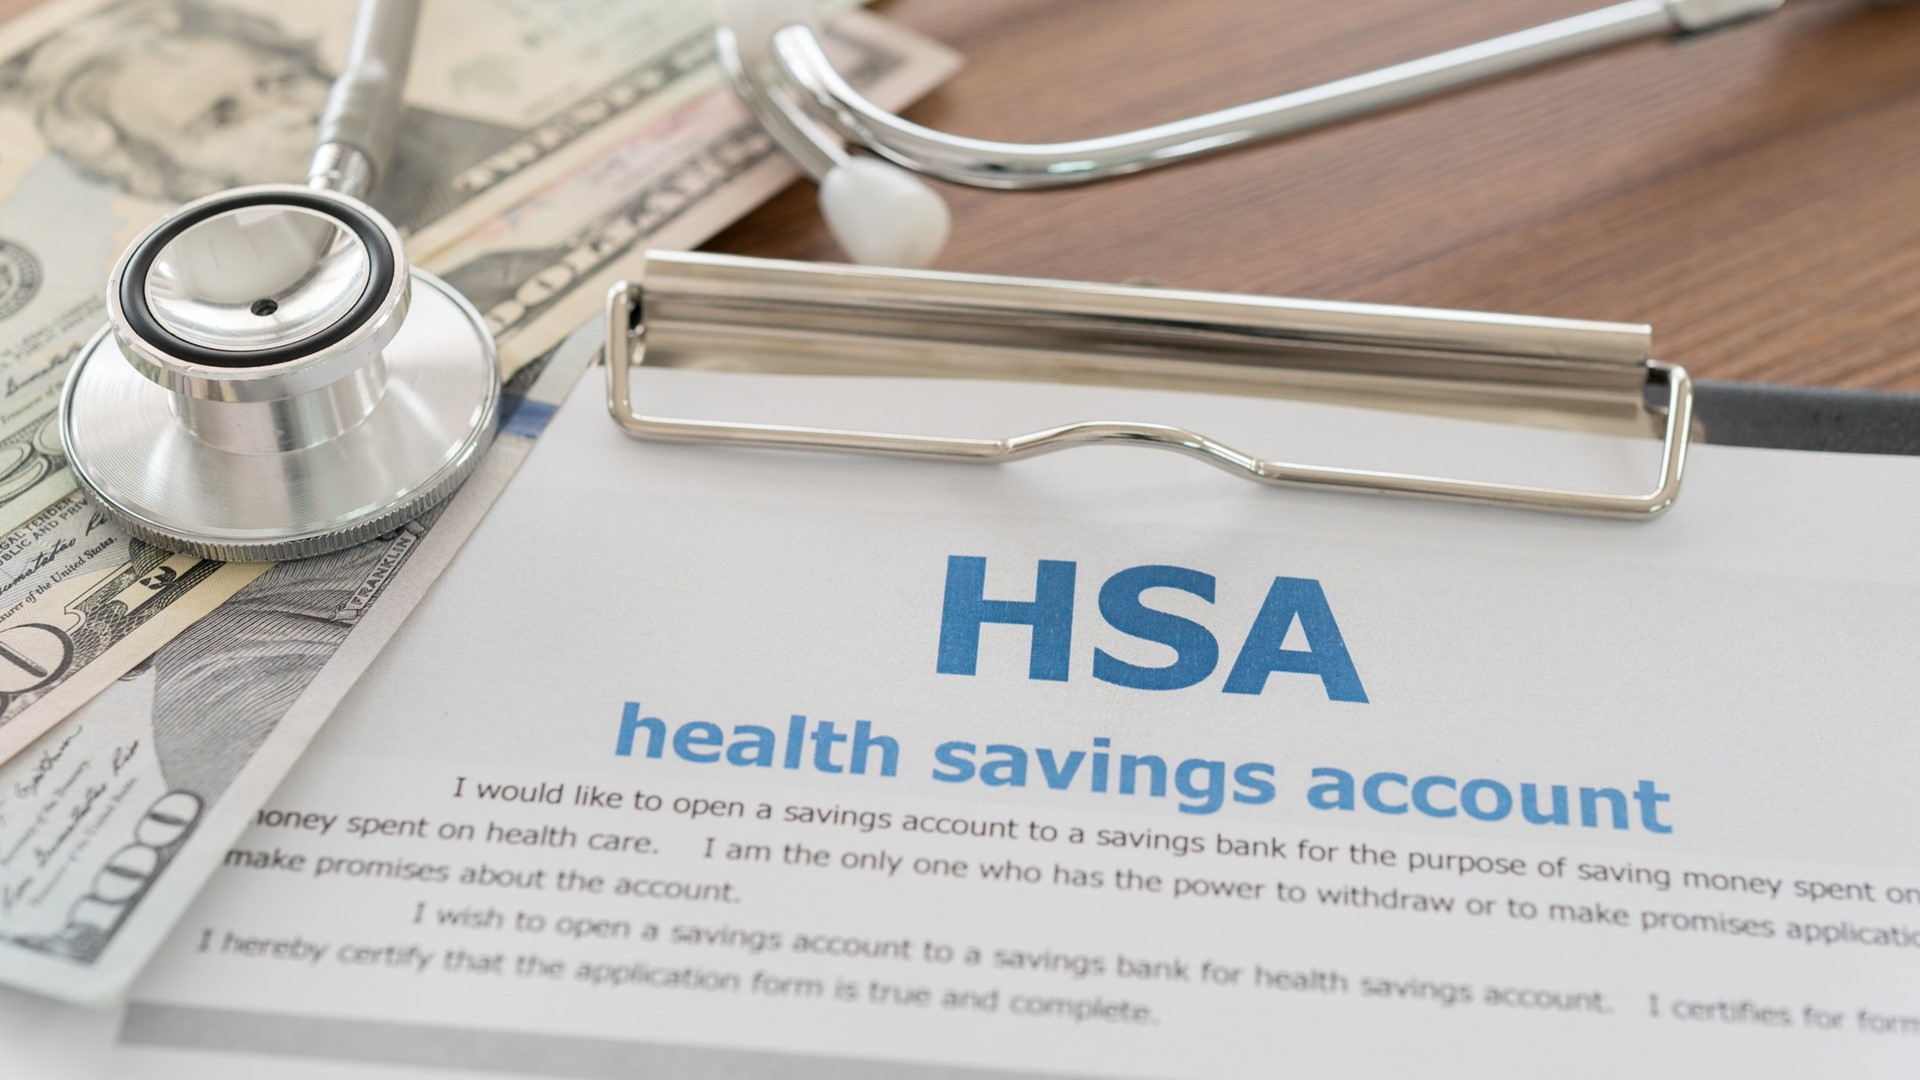 Don't miss out on FSA or HSA savings